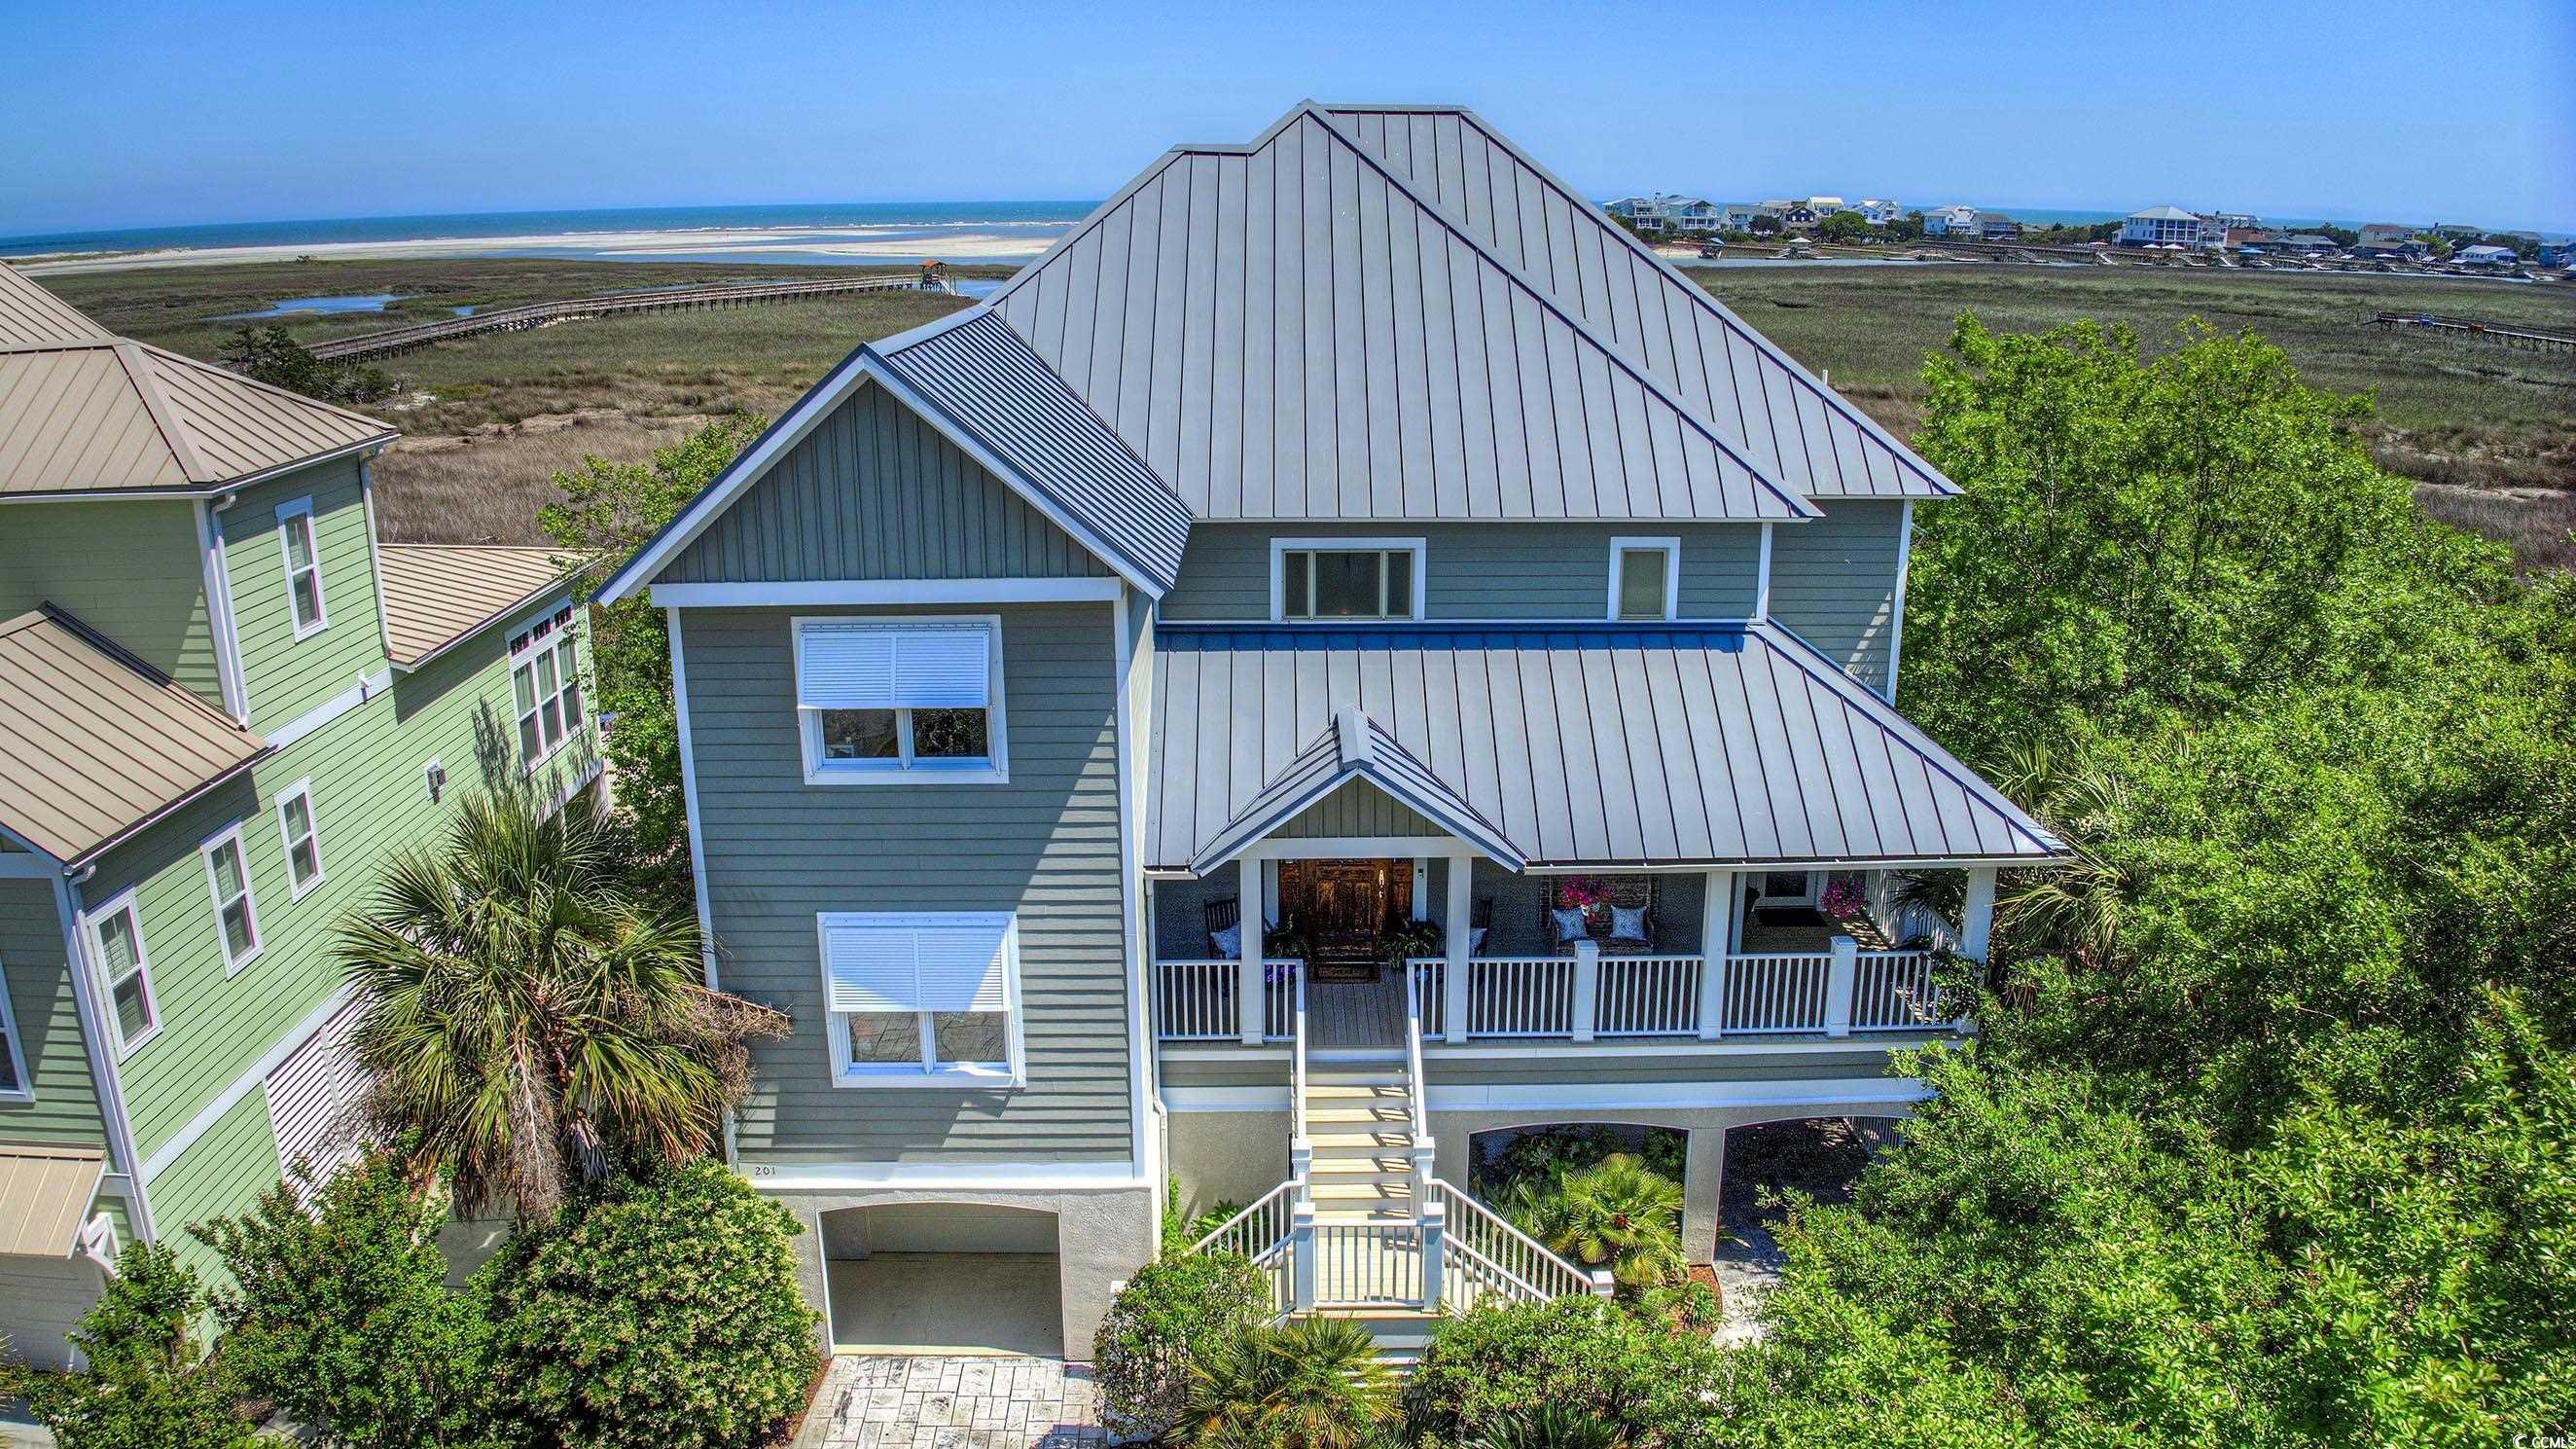 want a home with truly spectacular views? you just found it!! this custom designed, coastal inspired, creekfront 5 bedroom, 5.5 bath home provides some of the best views of the creek, marsh, pawleys north inlet and atlantic ocean that you will find. enjoy sunrise over the ocean, views of the changing tides in the inlet and birds at play over the water. the views from this home change by the hour as the tide ebbs and flows through pawleys north inlet. this home has custom features throughout to include heart of pine flooring, solid wood doors and a custom heart of pine four level open staircase. there is also an elevator to take you from the ground level at garage to the third level of the home. the fourth level is a loft area or home office with an open sundeck. the first floor is the main entry from front porch and has 4 bedrooms, 4 bathrooms and 2 bedrooms are on ocean side of home. the first floor has its own family room, custom full wall length-built ins with fireplace and the main laundry area. the 2nd floor is the main living area of the home and has a custom designed kitchen that includes a large work island with gas cooktop, breakfast bar, all built-in stainless steel appliances with sub zero refrigerator, double wall ovens, wine fridge, microwave, dw and a farm sink. solid surface quartz / granite countertops and pantry. the kitchen is open to the dining area and 2nd floor family room with custom built ins and fireplace. this is the main gathering place of the home and is open to the 2nd floor screen porch, covered porch and open deck, all offering views of the pawleys waterfront that make this home so special. the primary bedroom suite is also located on the main floor (2nd) and has fantastic views, 2 closets, dressing area and primary bath includes a jetted tub, walk in tile shower and a 2nd washer and dryer conveniently located next to the bathroom. this home was designed with lots of windows to allow the carolina sunshine in and provide 180 degrees of views from multiple levels of the home. the location of the porches and decks on all floors adds to the coastal feel of this home allowing a great flow from indoors to outdoors. there are 2 screen porches, 2 covered porches and 2 open deck areas on ocean side of the home. there is also a wrap-around front porch. the garage area under the house provides ample parking for vehicles, abundant storage and an outdoor shower and downstairs toilet. enjoy your private saltwater swimming pool and a hot tub and or take a walk to the community dock for fishing, crabbing or just sit and enjoy the waterfront under the covered dock. launch a kayak and cruise the inlet and marshes or paddle over for a day at the uncrowded beaches and at pawleys north inlet. this property offers many different coastal water activities right at home in your backyard. located in sweetgrass, a gated waterfront community with community boardwalk, covered dock and floating dock on pawleys inlet. be sure to view the 3d floor plan walk thru ( https://my.matterport.com/show/?m=beqrlcsbymj&mls=1 ) ..... and the video ( https://www.youtube.com/watch?v=uvnlidaksu4 ) that shows the location and a complete aerial view of the community dock, inlet and beaches. schedule your private showing today! come see this exceptional home and see what makes this location truly special.